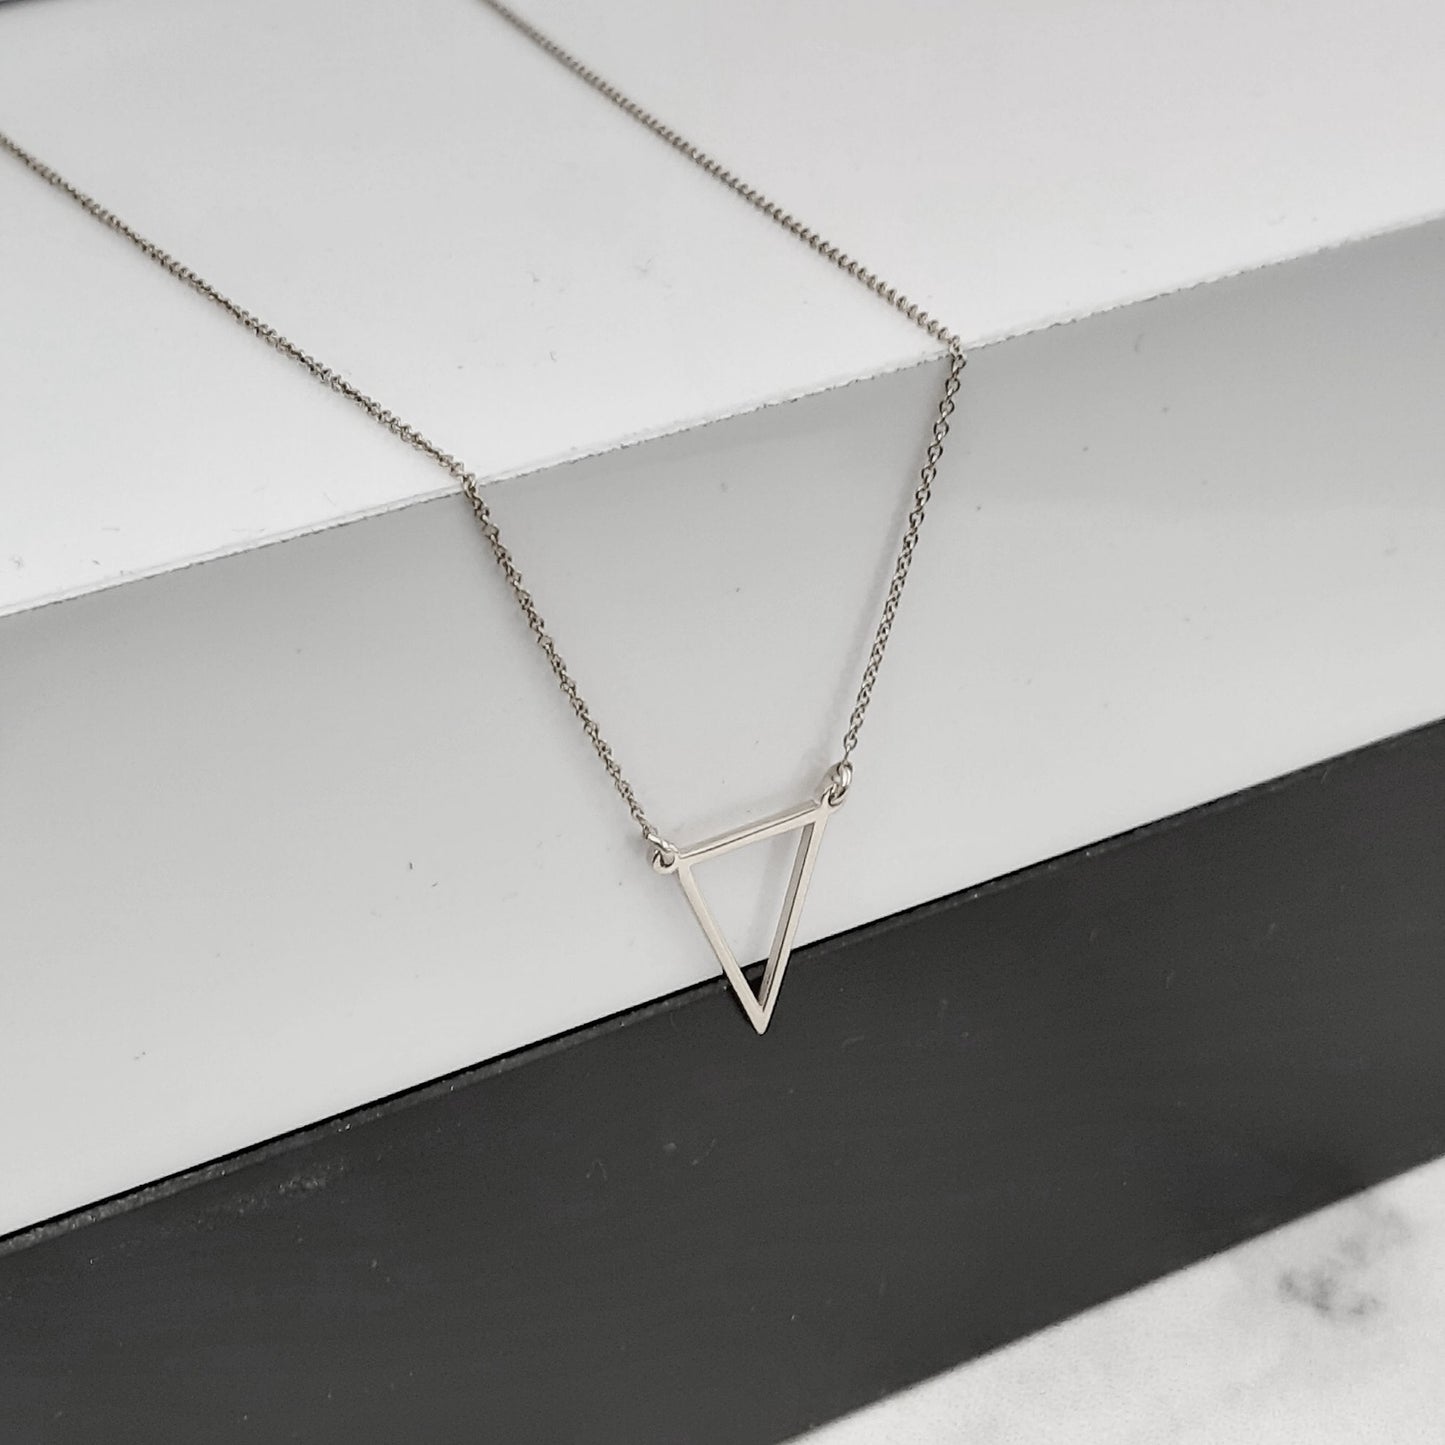 Gold Triangle Necklace, 9K, 14K Solid Gold Necklace,Bridesmaid Gift,Birthday Gift,Dainty Chain Necklace, Floating Triangle, Gift For Her